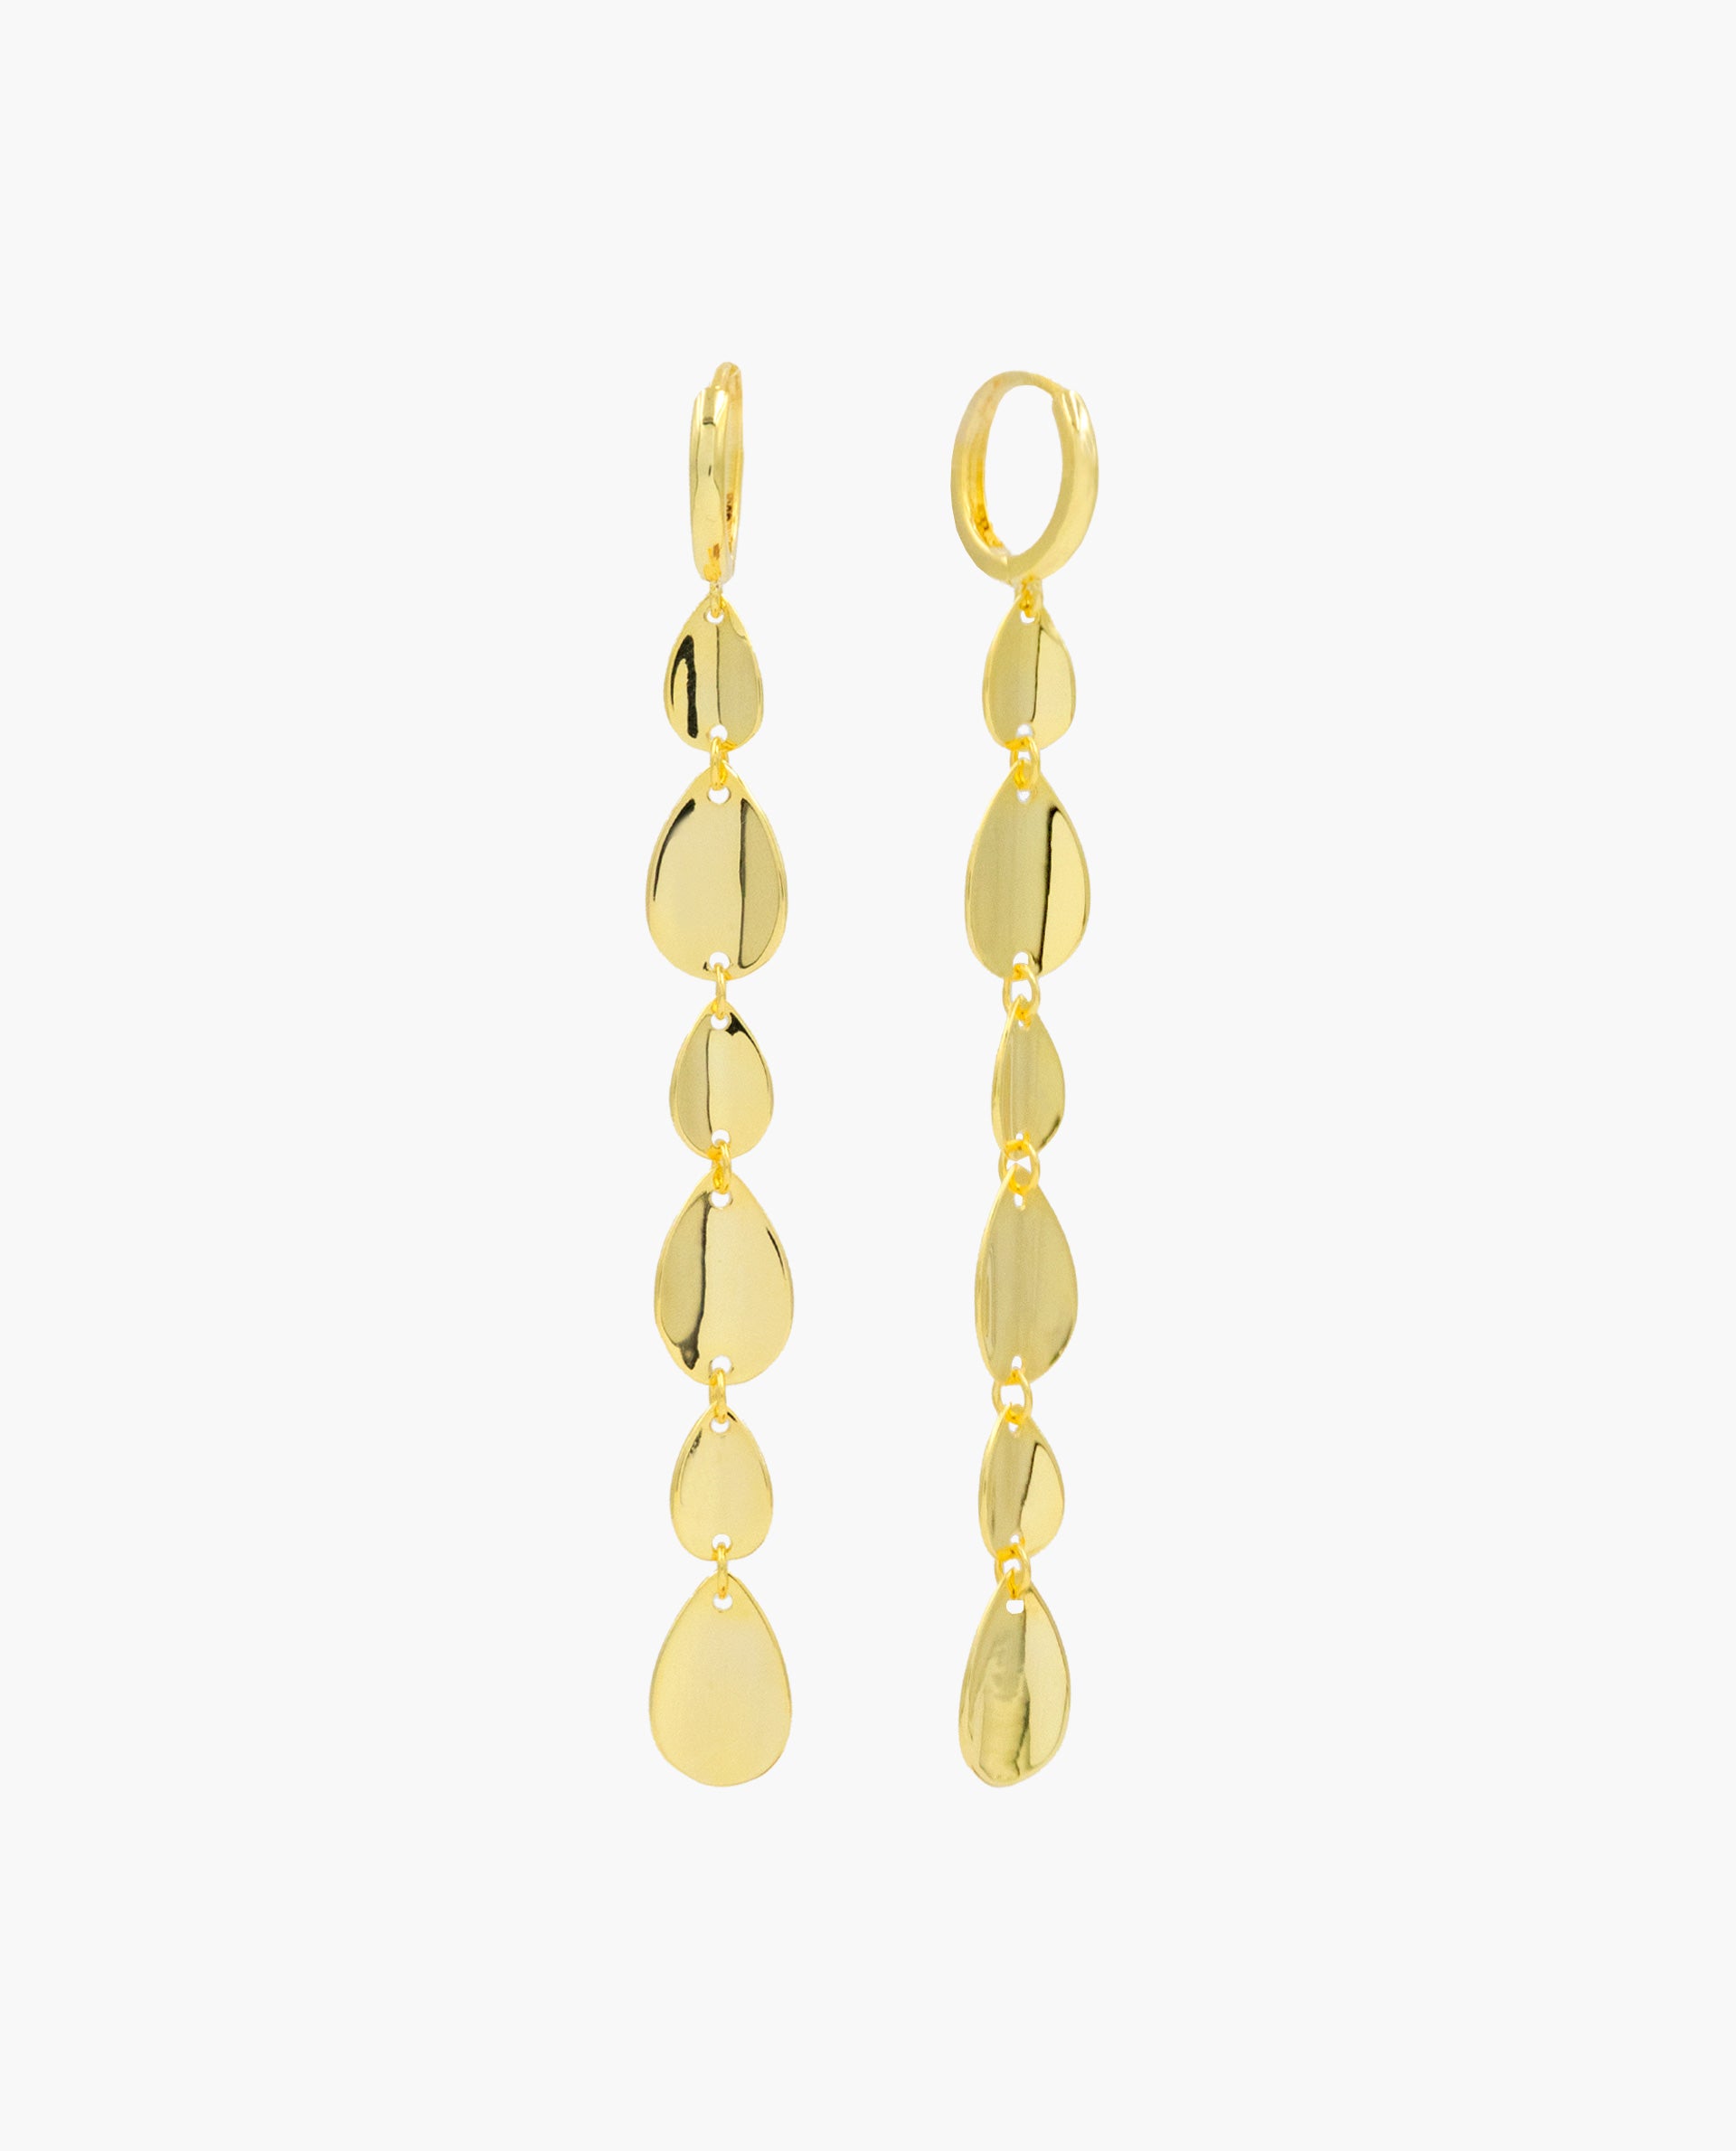 RAINDROPS EARRINGS - GOLD PLATED